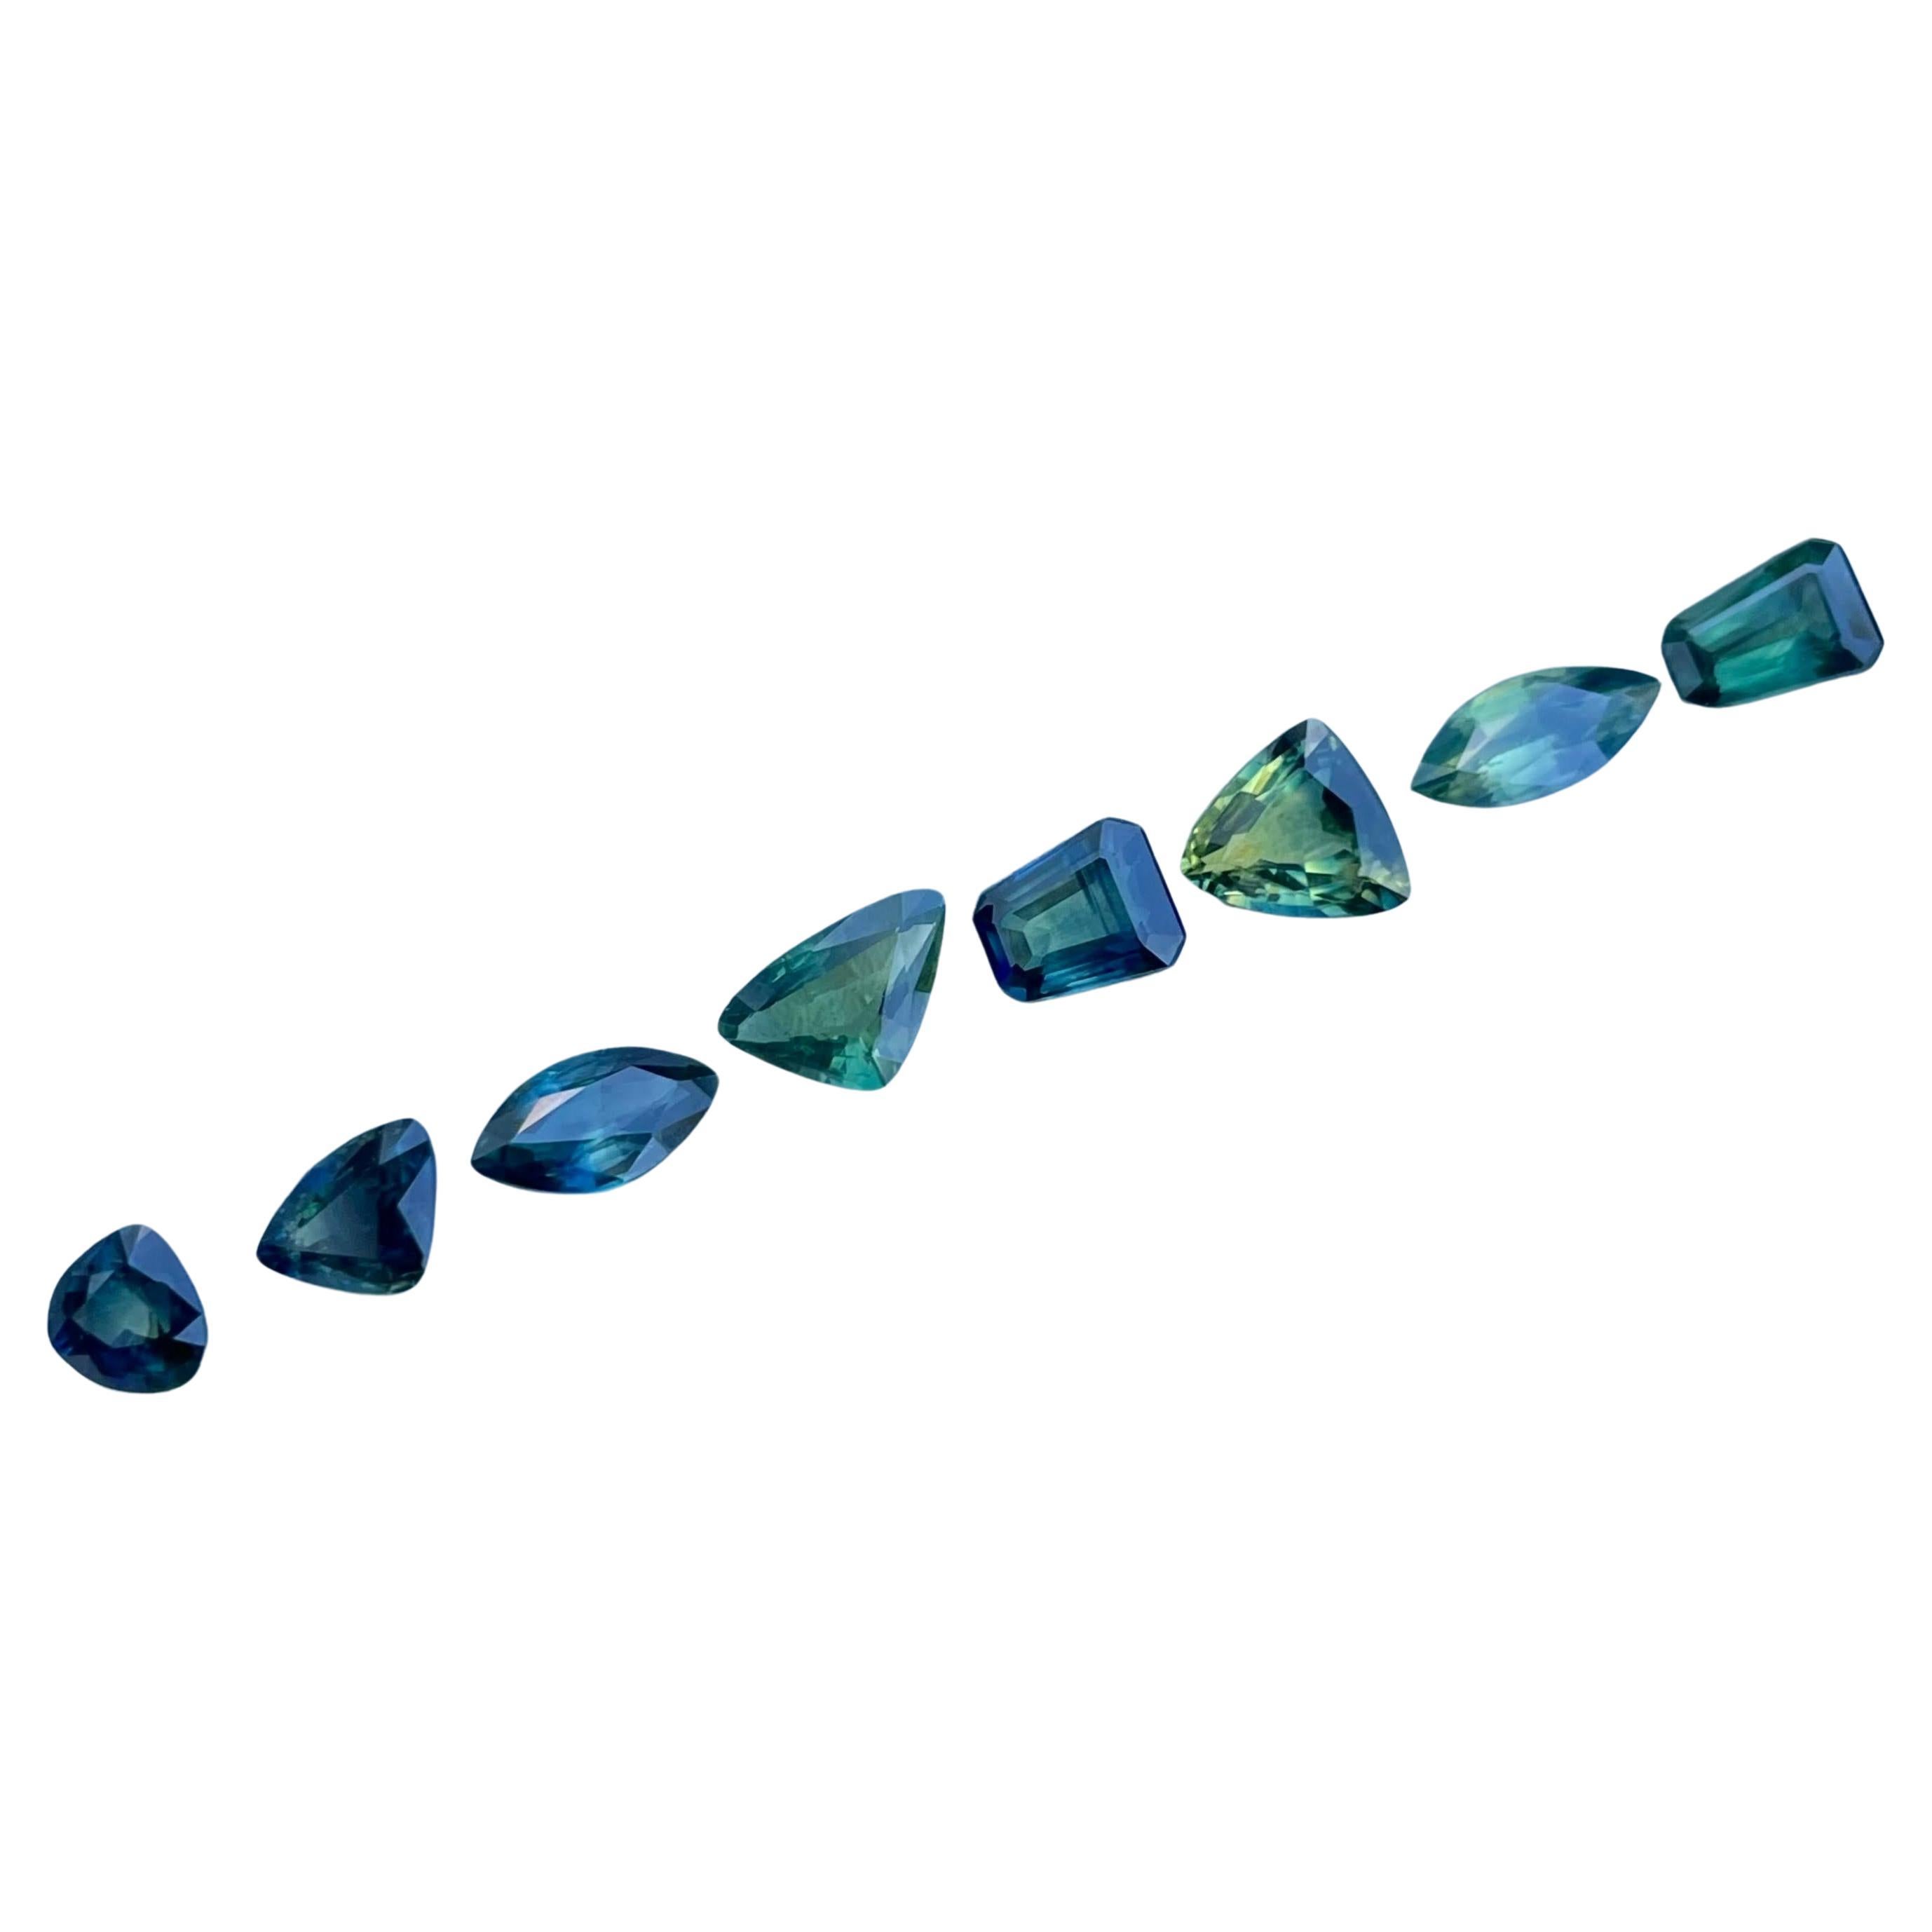 Parti Sapphire Lot 5.55 carats 8 Piece Set Natural Gemstones from Madagascar For Sale